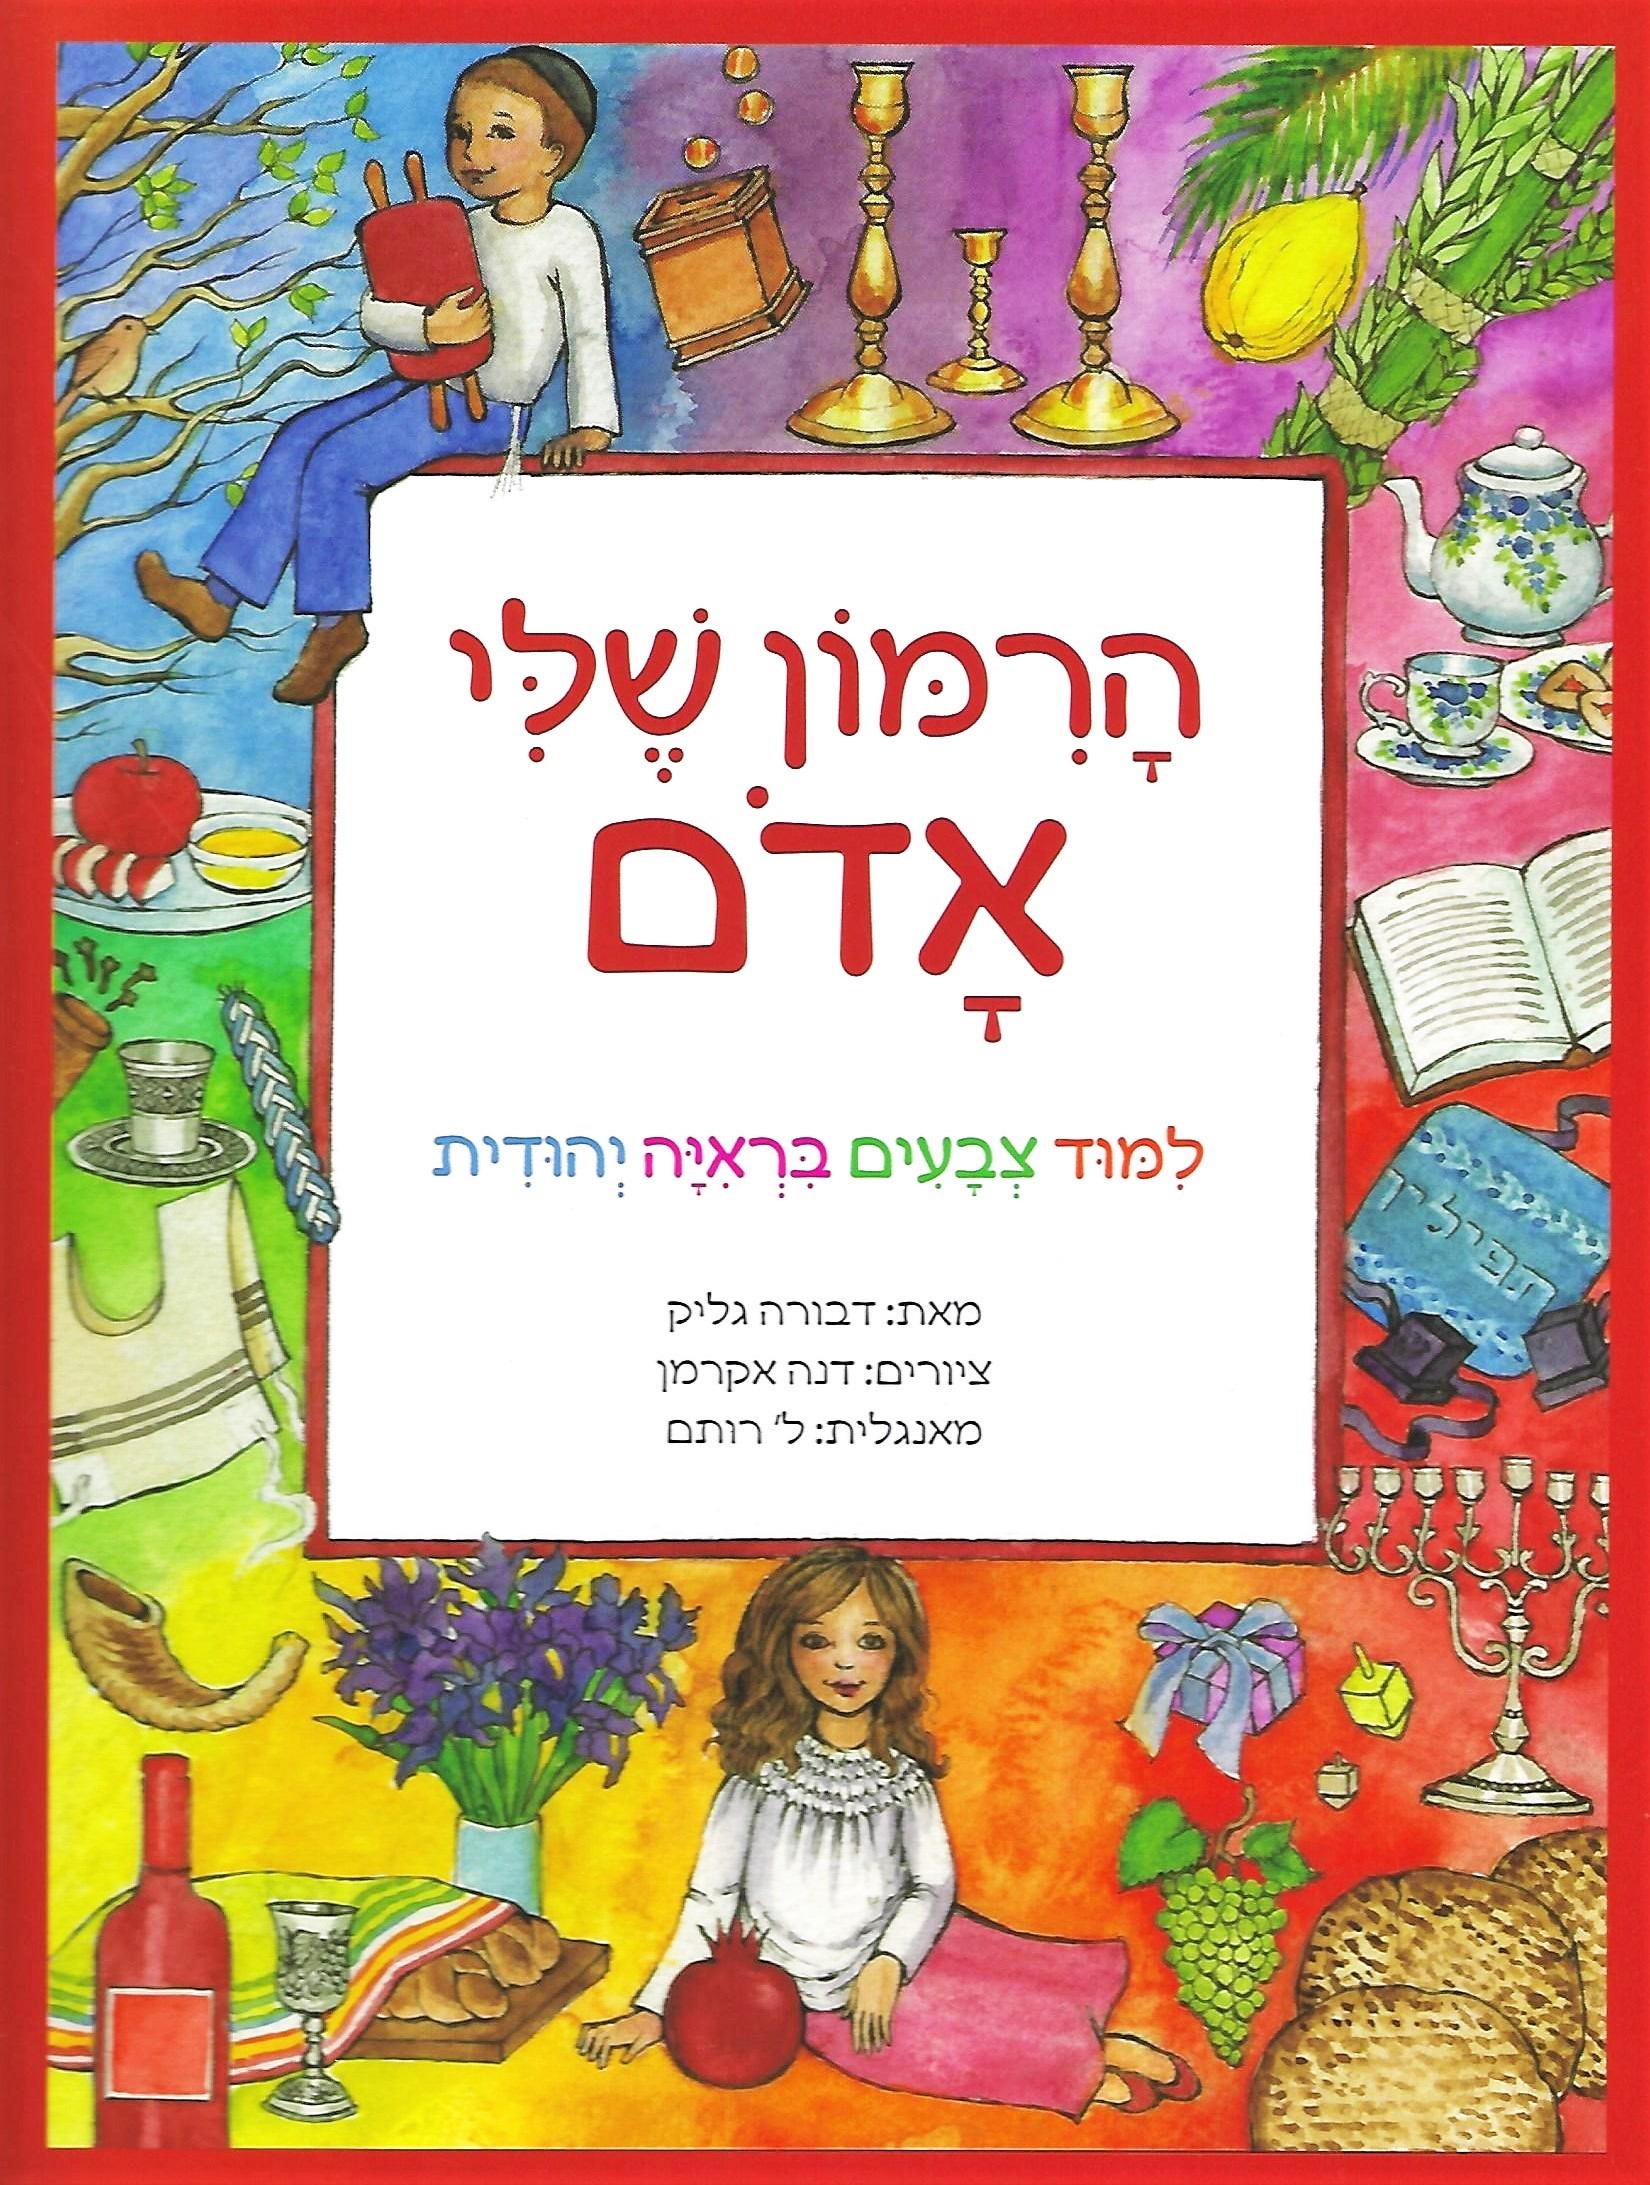 Red is My Rimon – A Jewish Child’s Book of Colors / HaRimon Shehli Adom (Hebrew Edition)